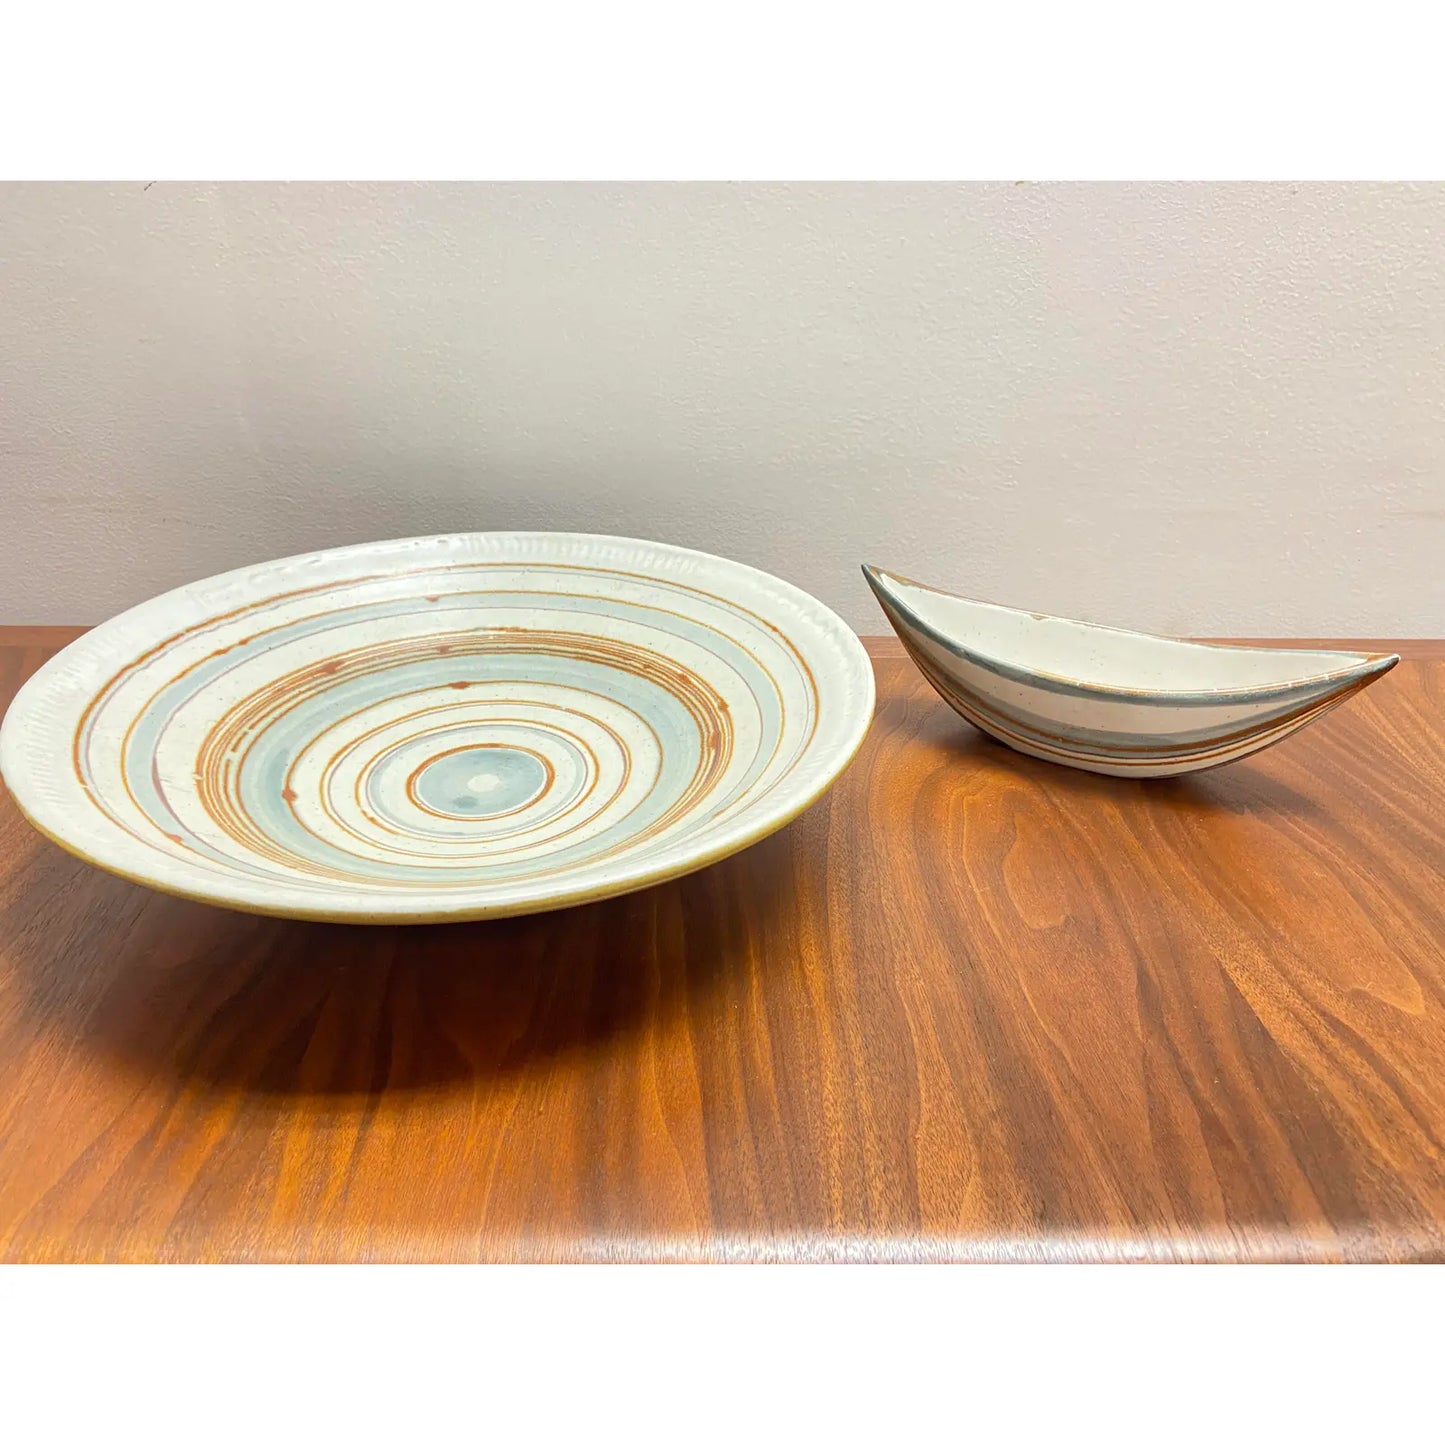 FONG CHOW'S 1950S "GULFSTREAM" PLATE & CANOE BOWL FOR GLIDDEN POTTERY